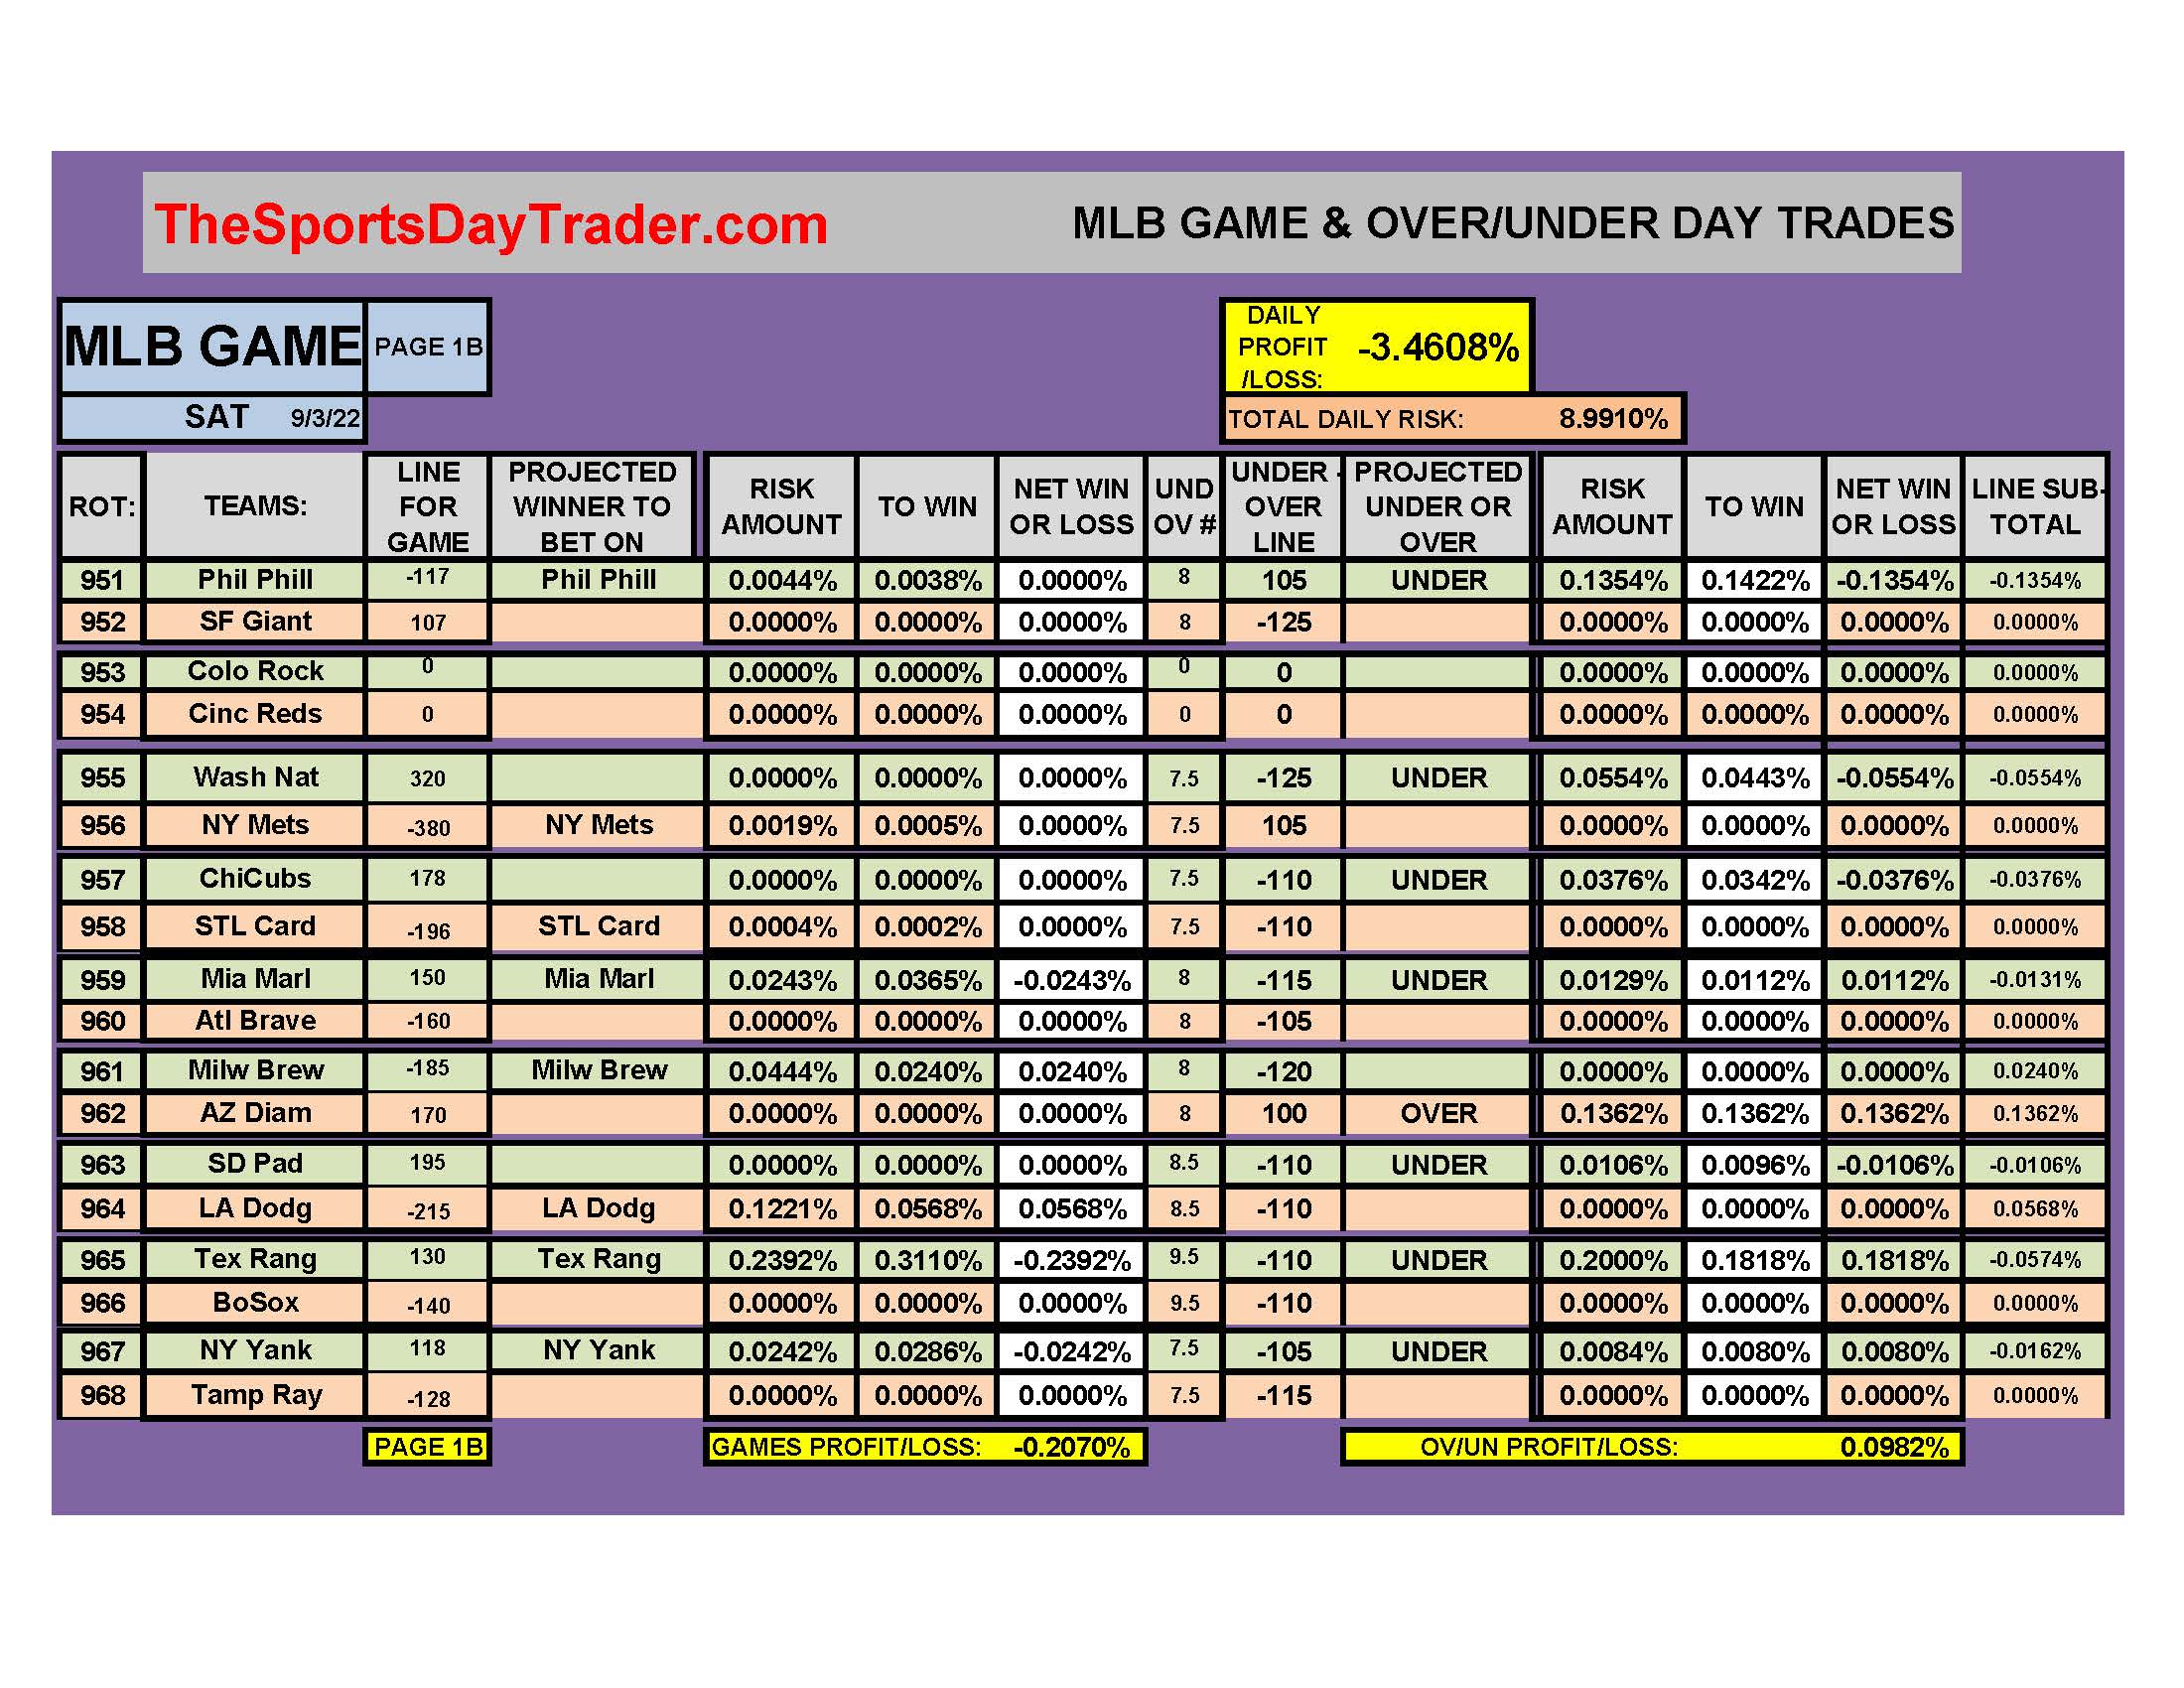 MLB 9/3/22 GAME DAILY RESULTS page 1